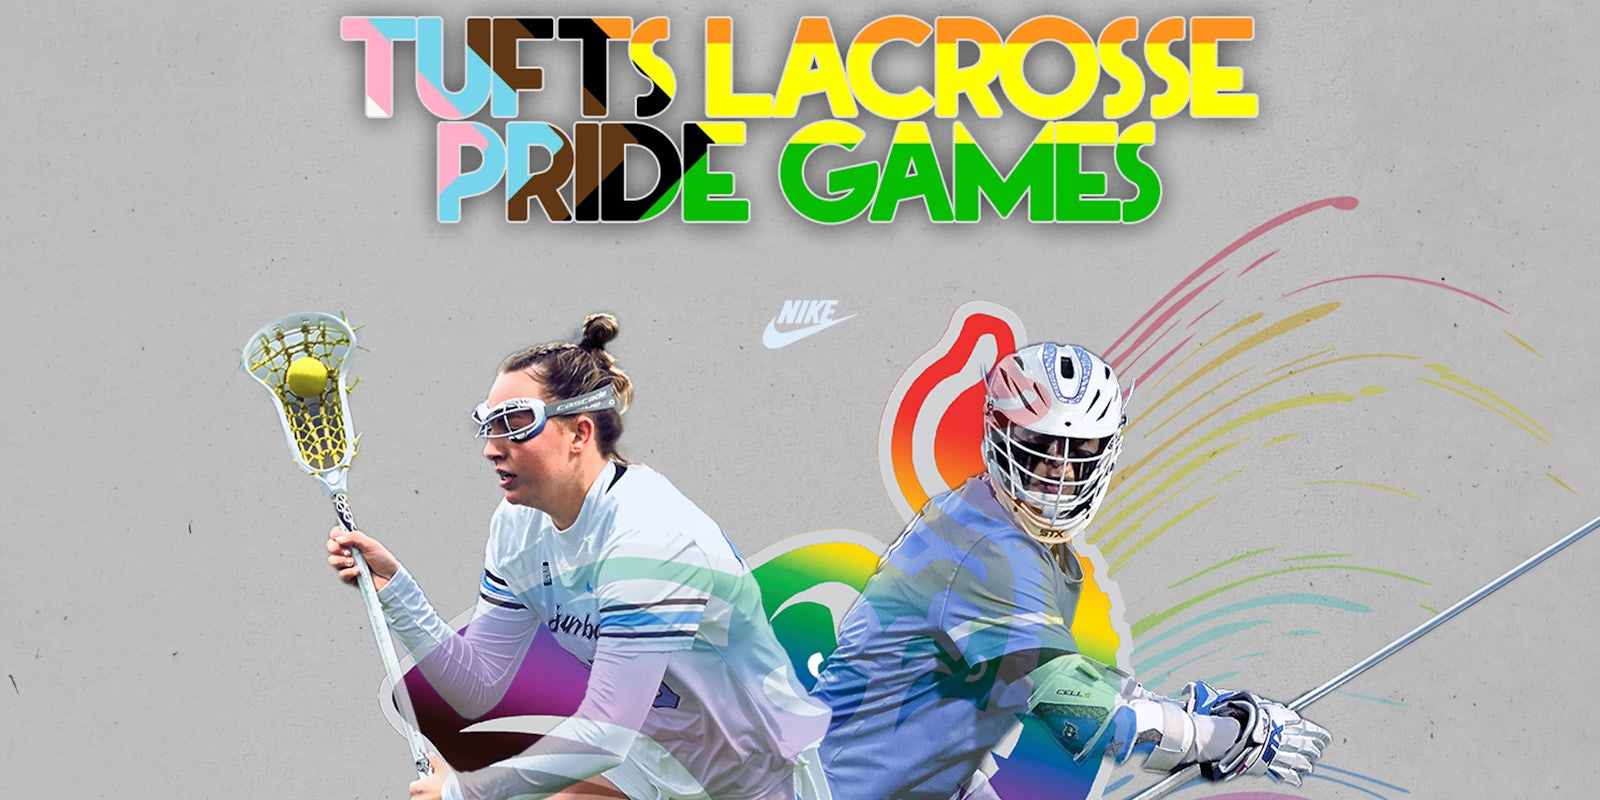 Liberal arts college bombarded with homophobic comments over Pride lacrosse game